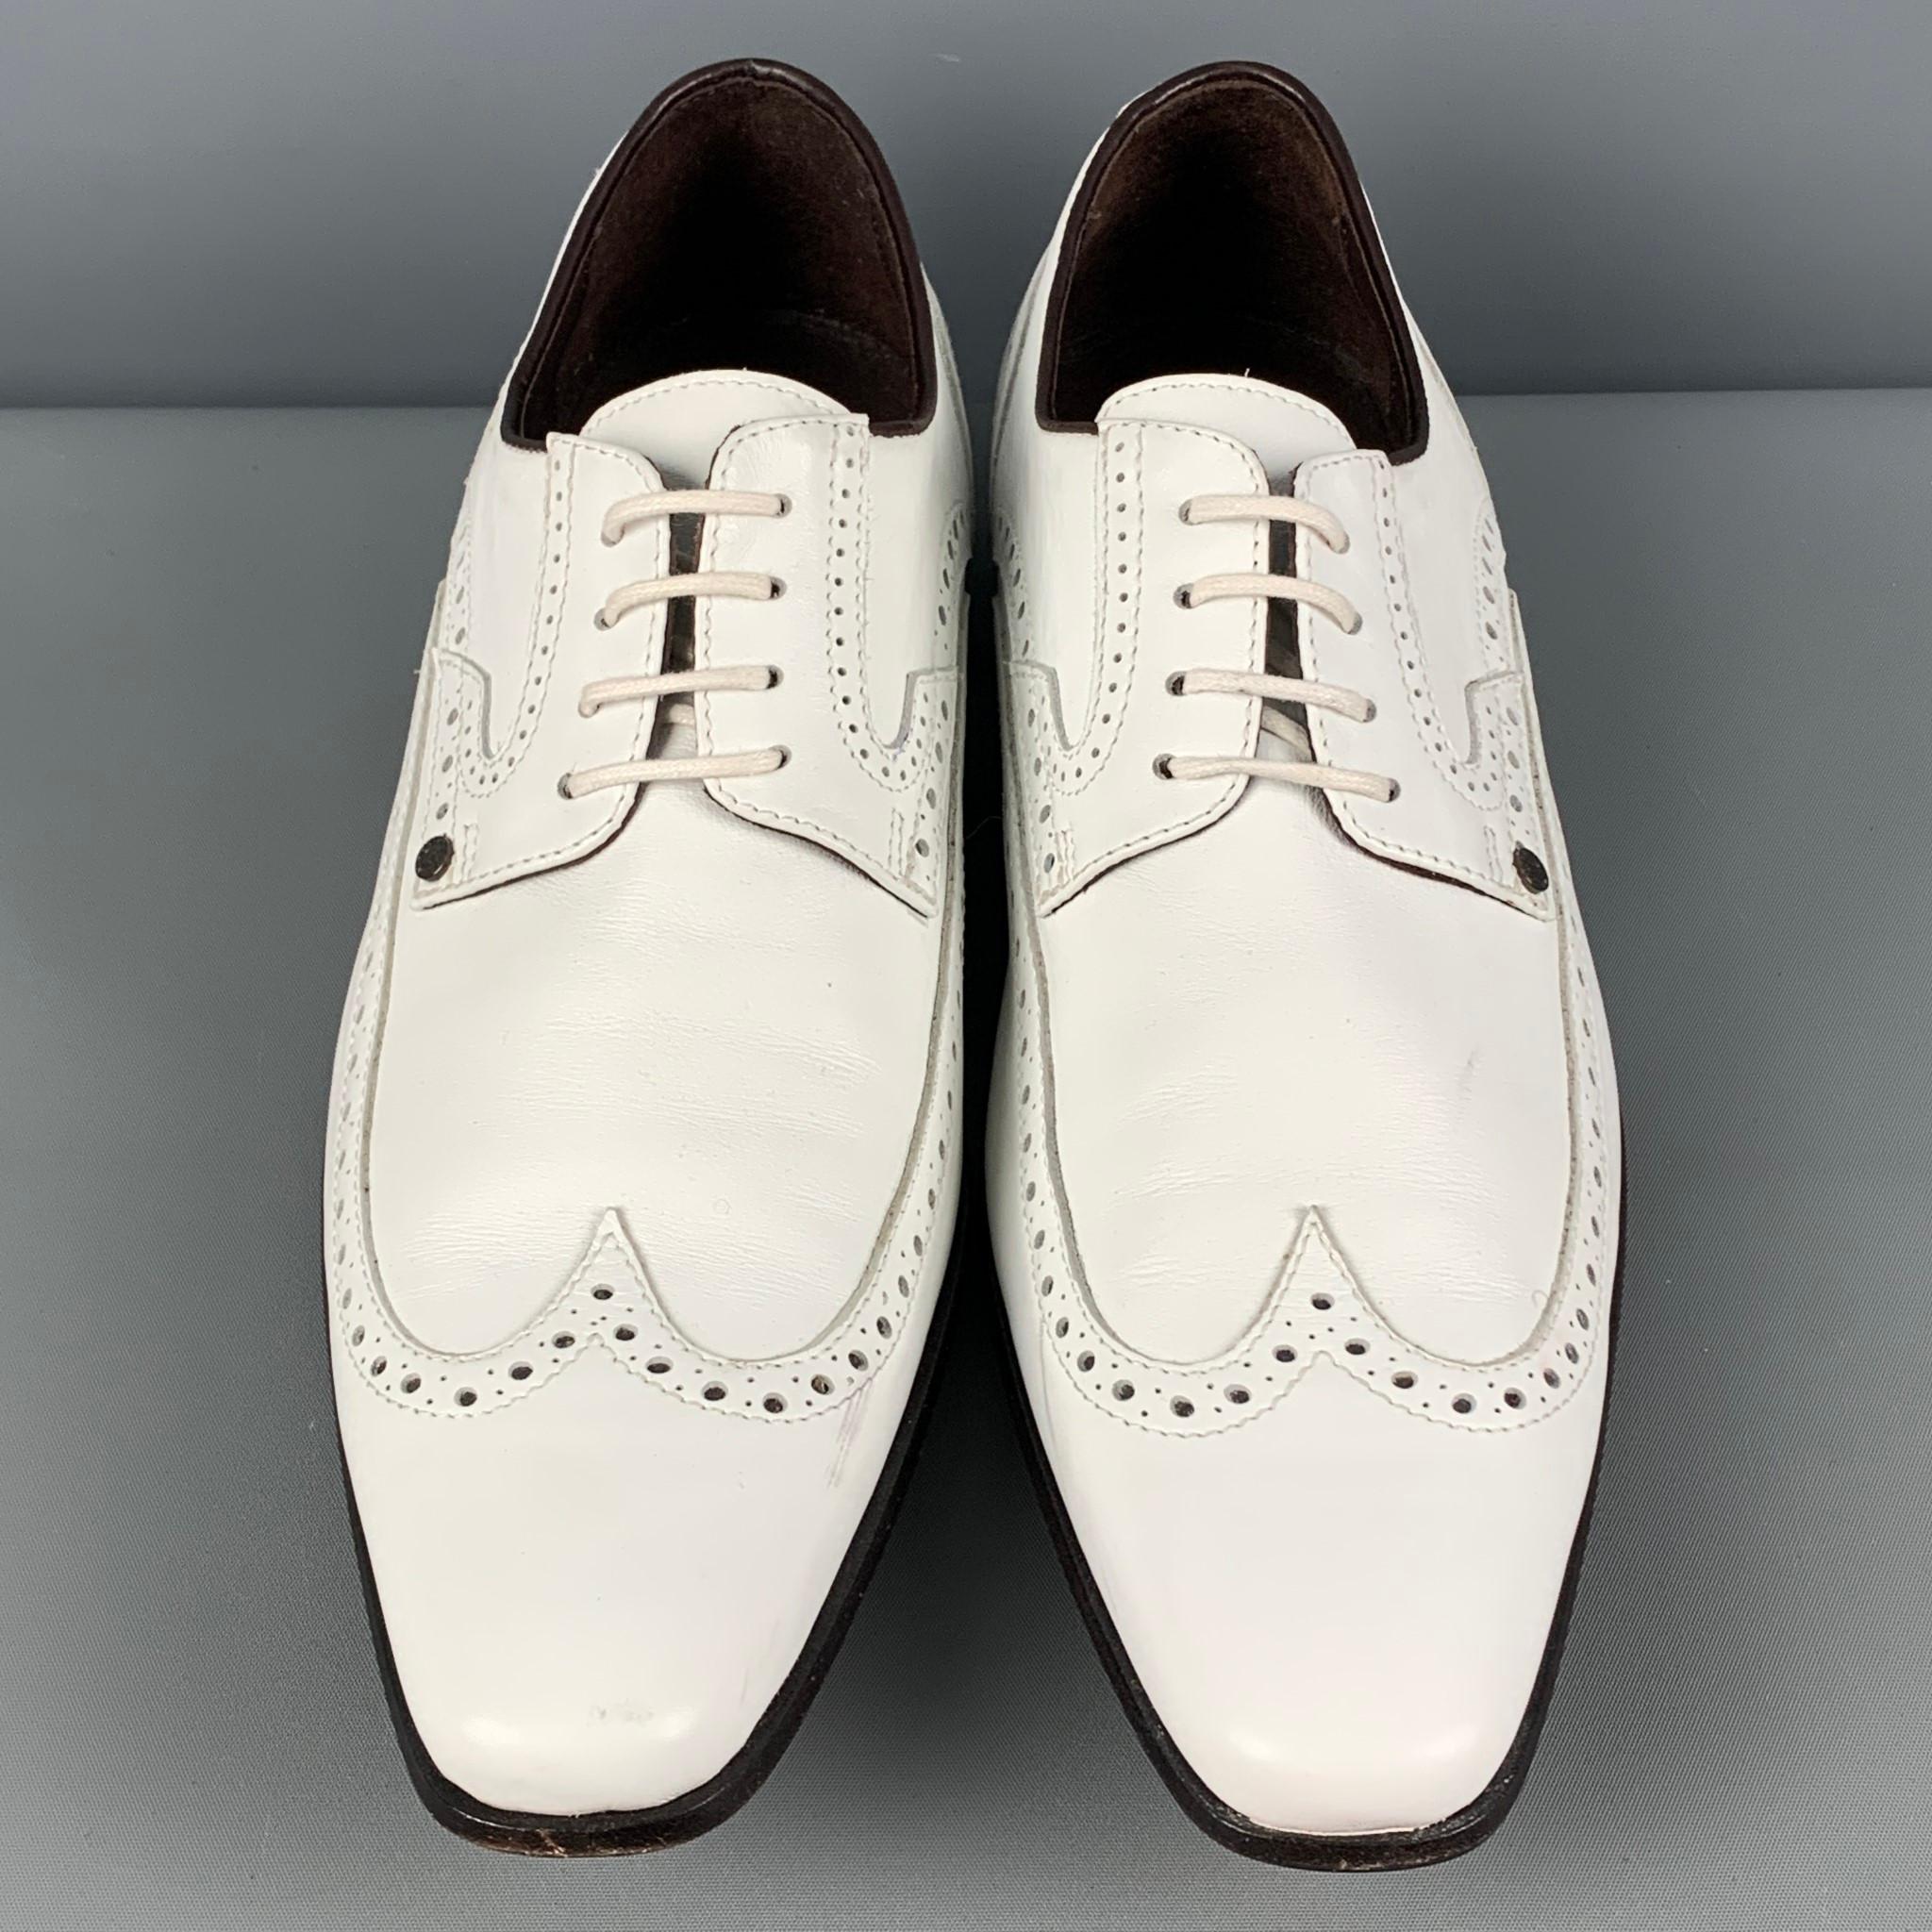 Men's VERSACE Size 9 White Perforated Leather Wingtip Lace Up Shoes